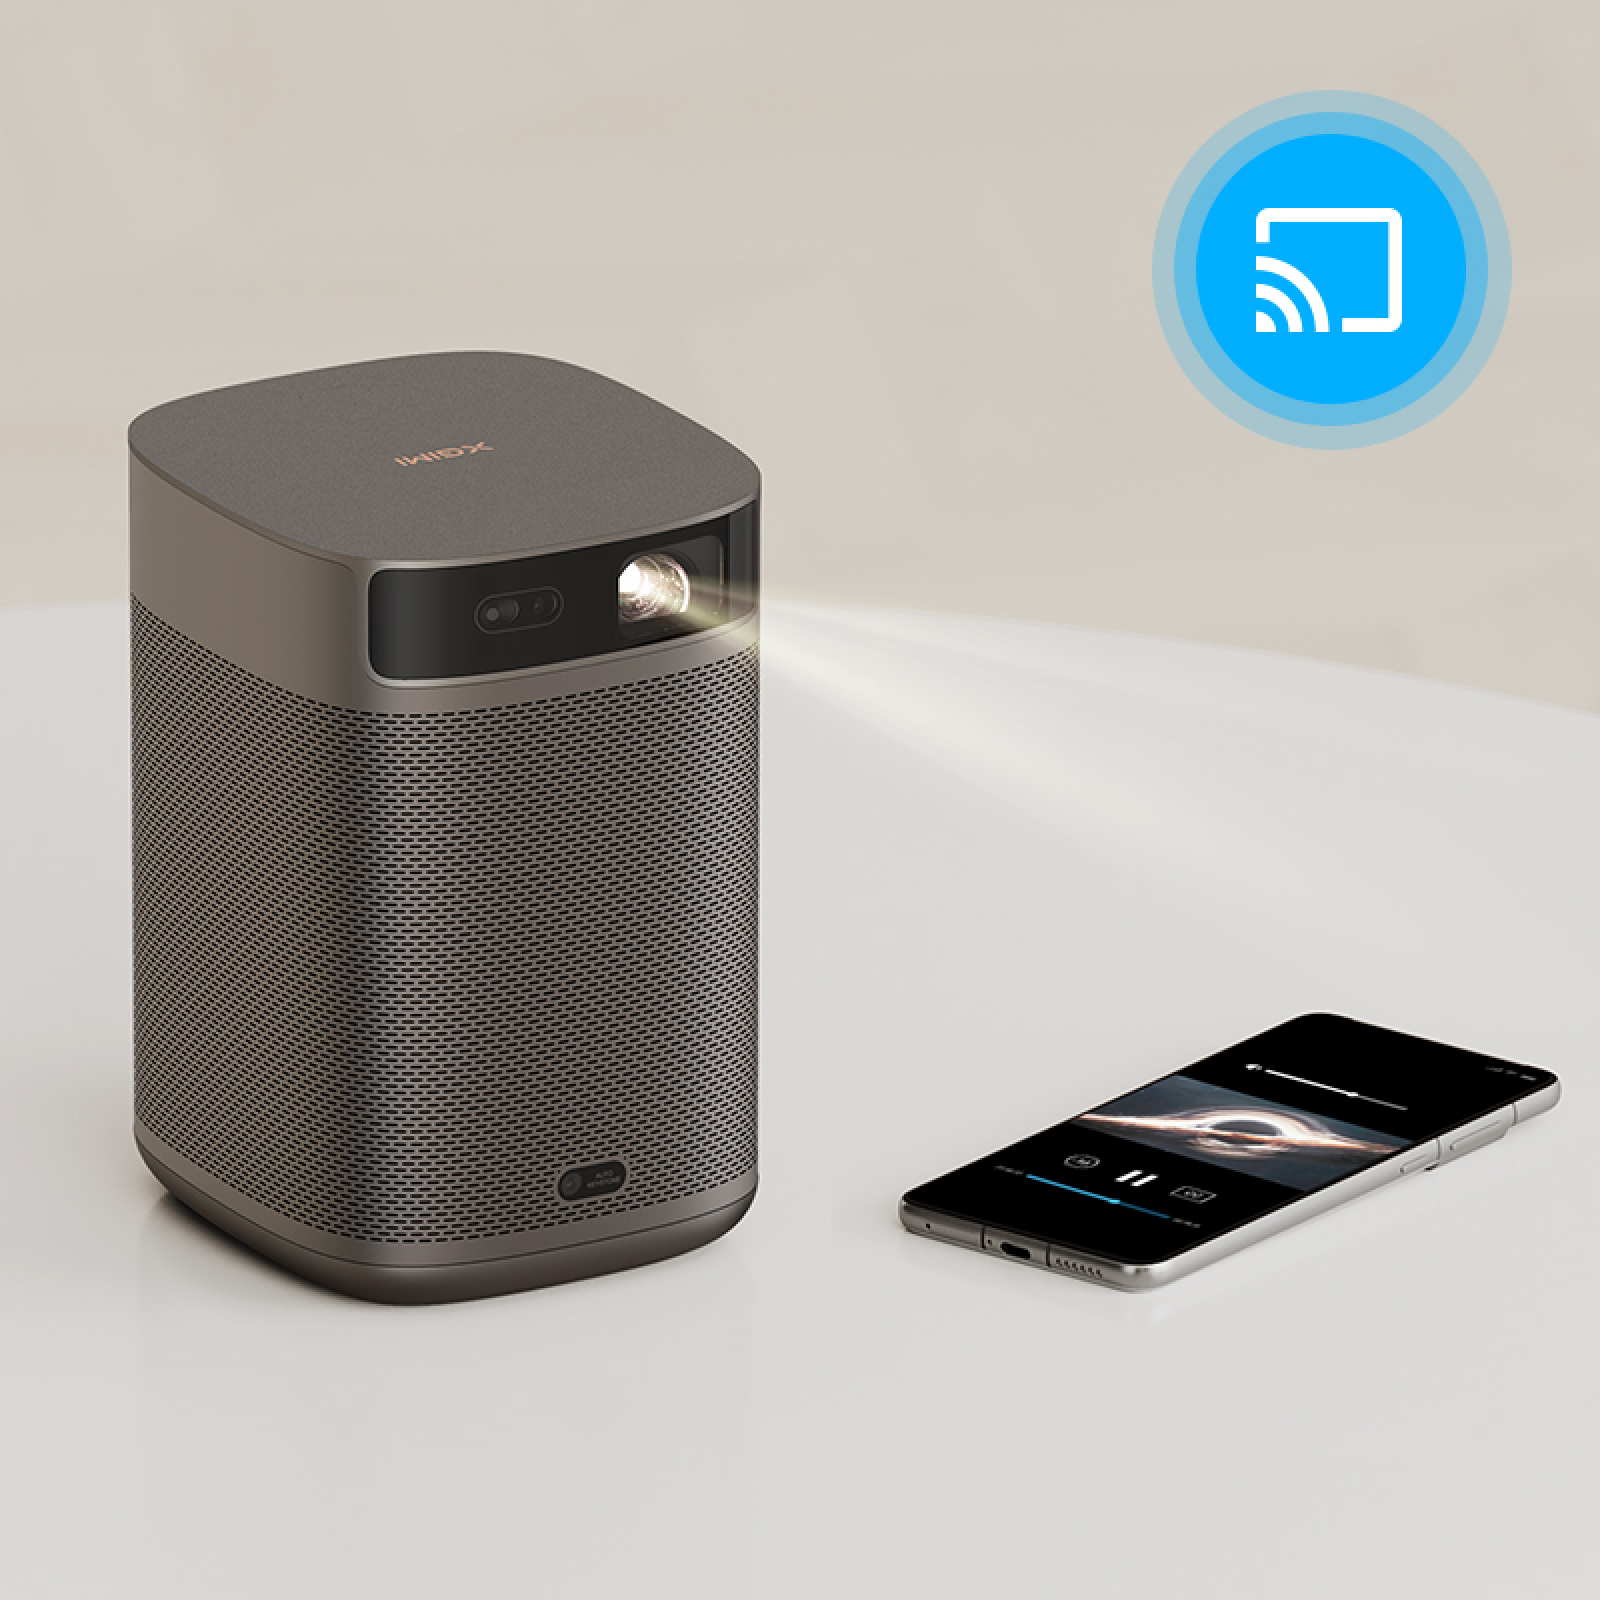 Xgimi announces Mogo 2 Pro portable projector with seamless auto-focus and  auto-keystone -  News